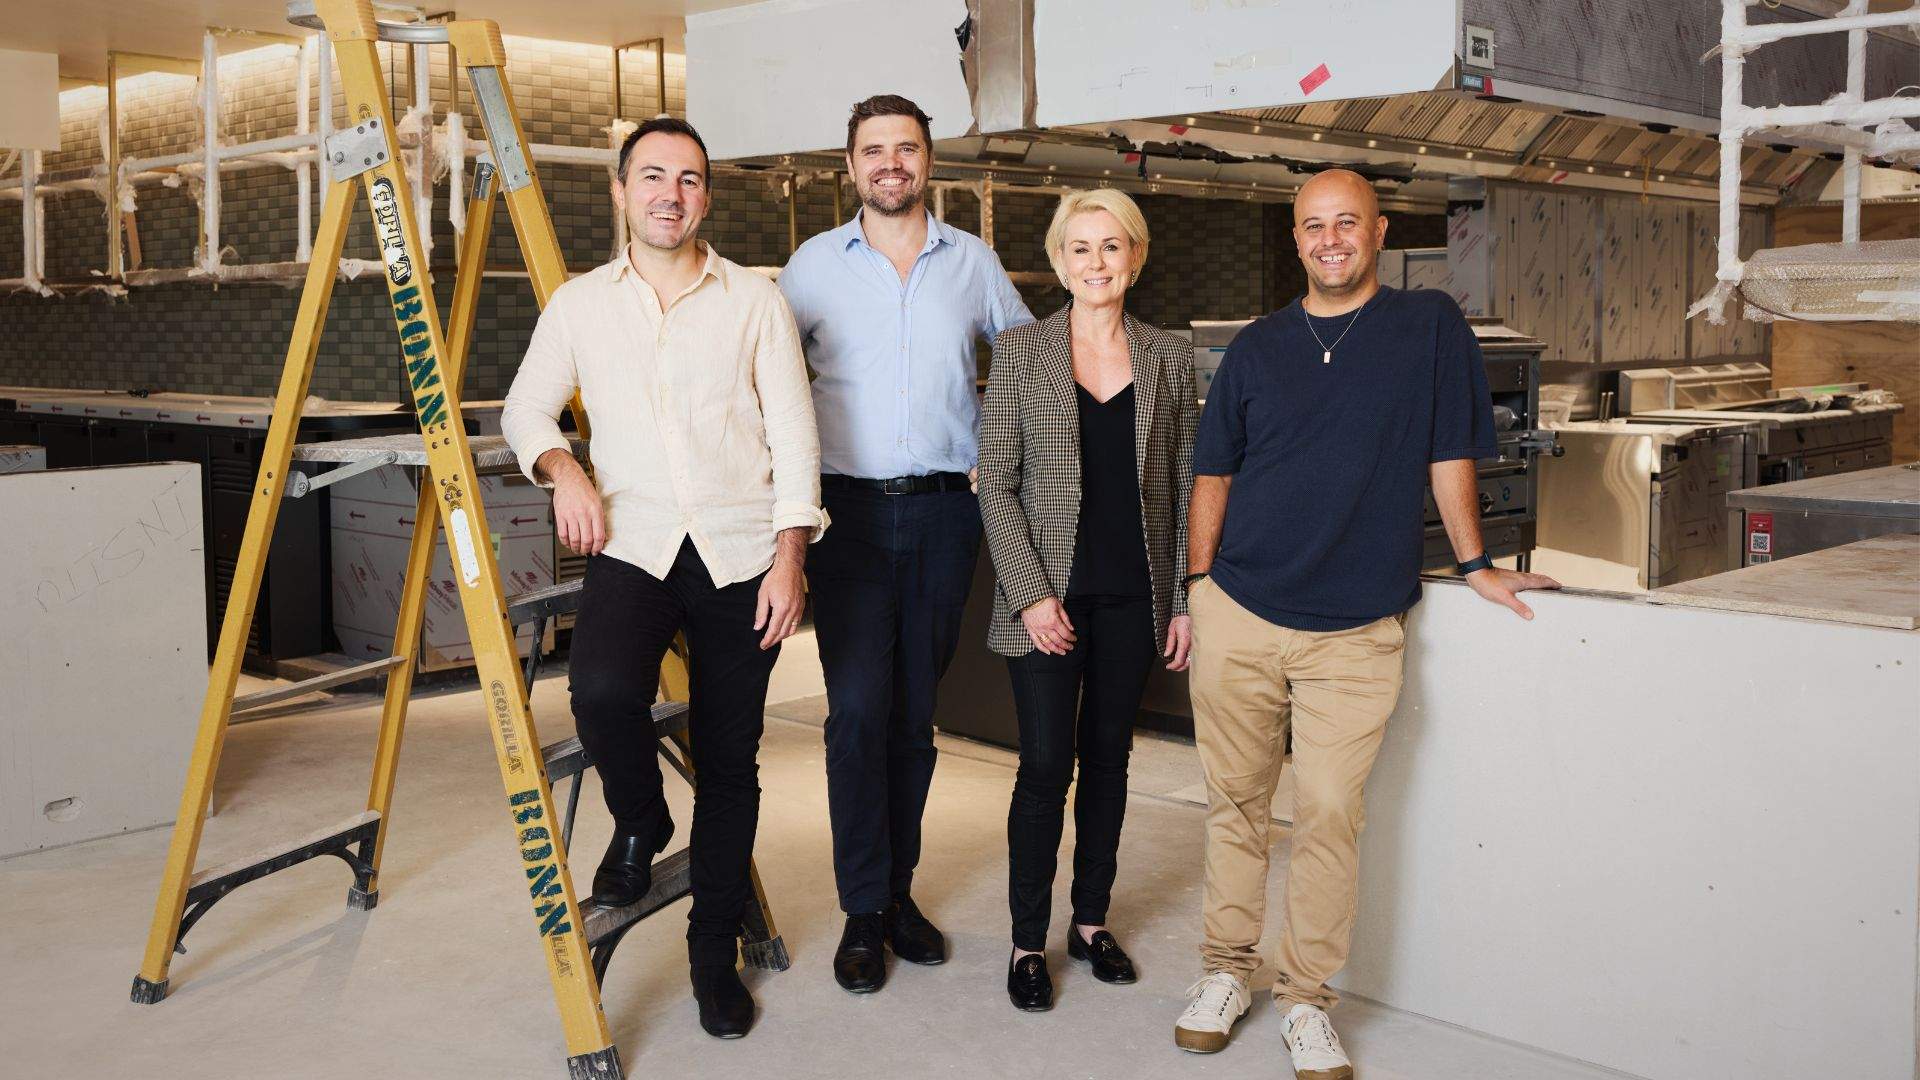 Paolo Saccone, Neil Leo, Lisa Hobbs and Sebastien Lutaud from Etymon Projects.